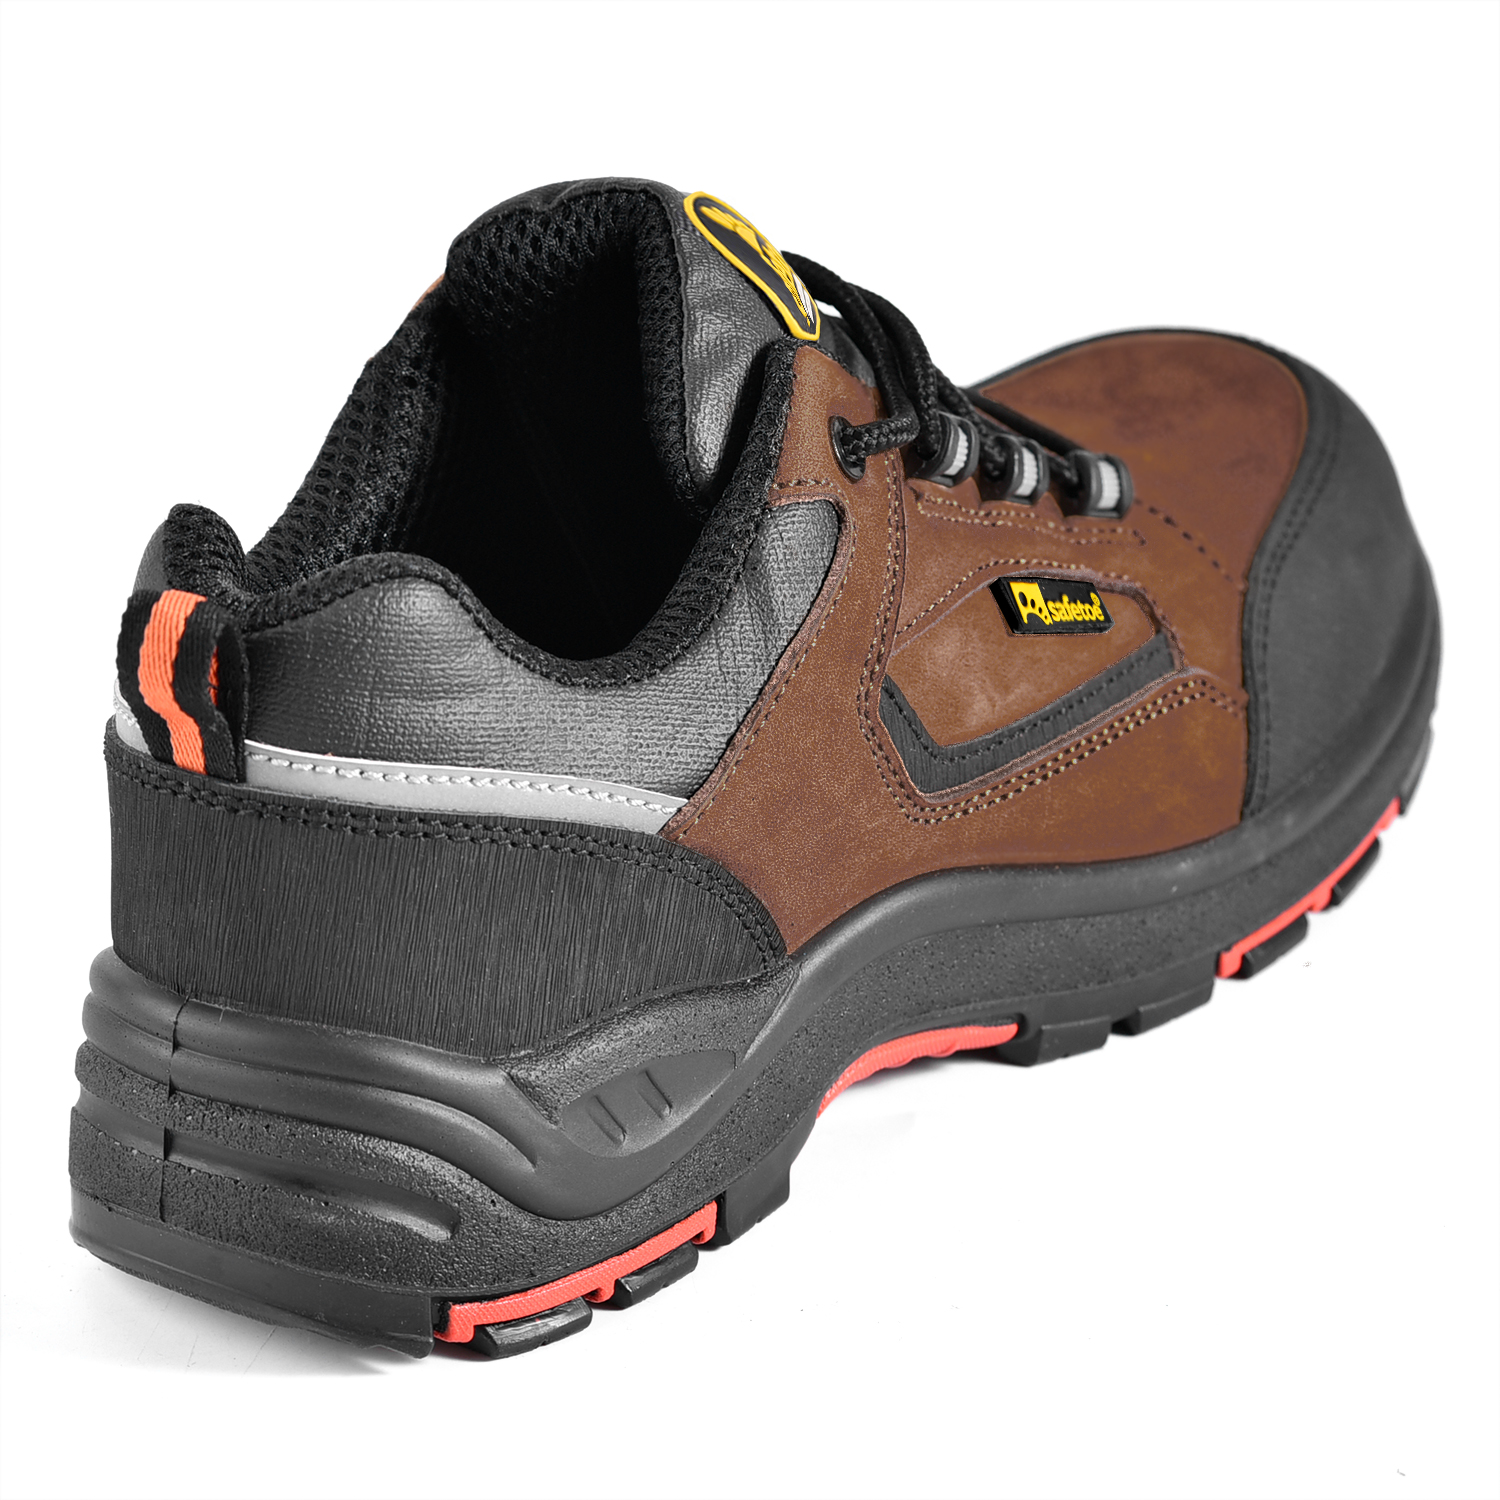 Nubuck Leather Metal Free Safety Work Shoes L-7342